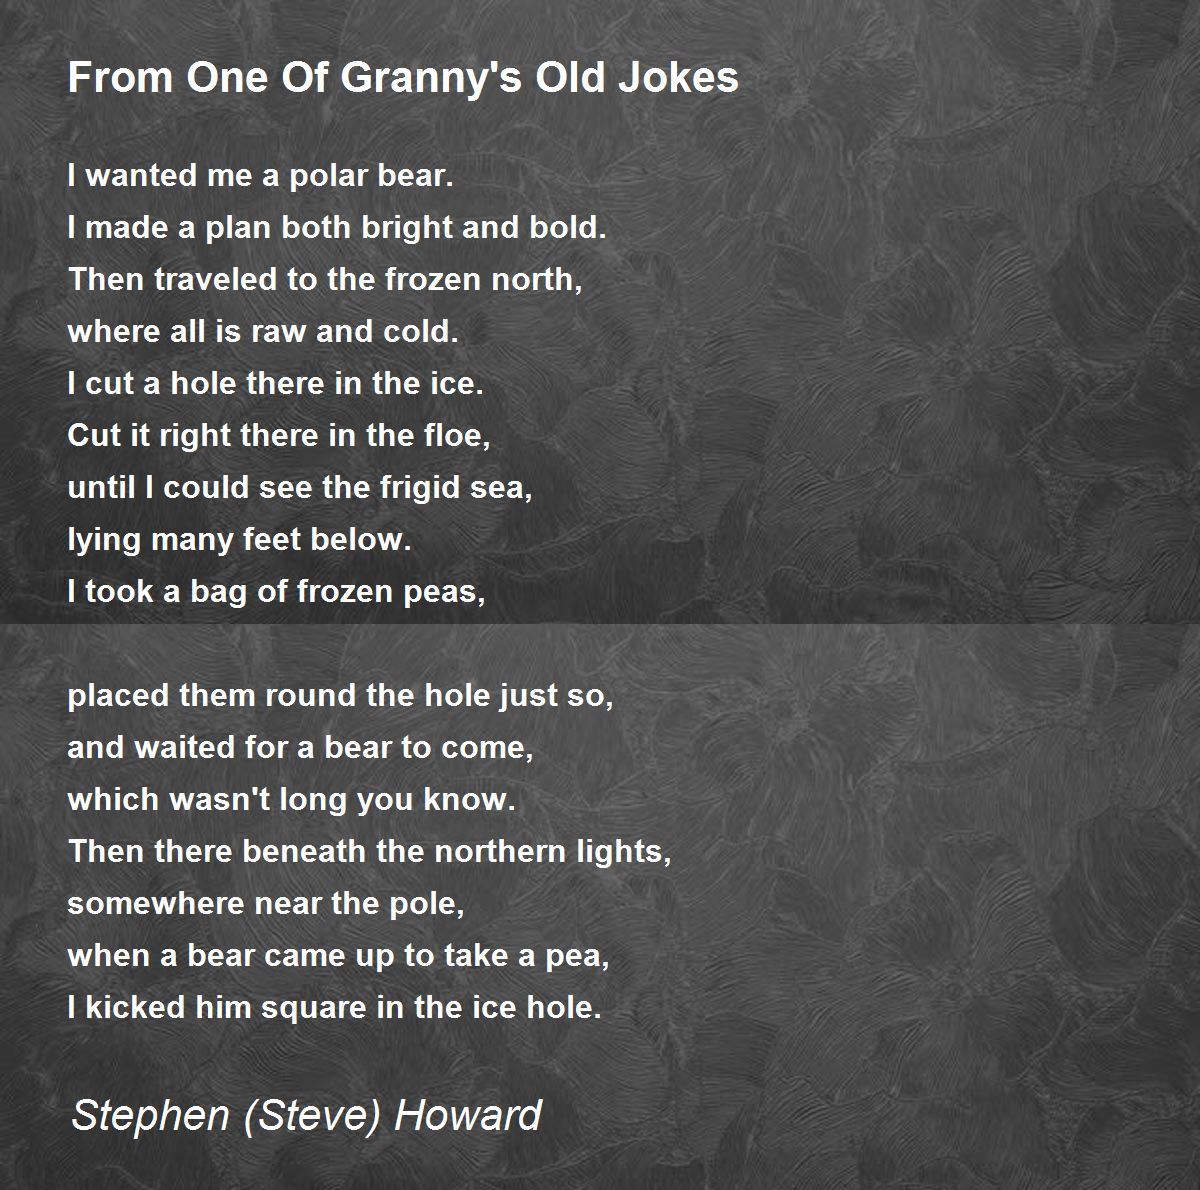 From One Of Granny's Old Jokes - From One Of Granny's Old Jokes Poem by  Steve Howard